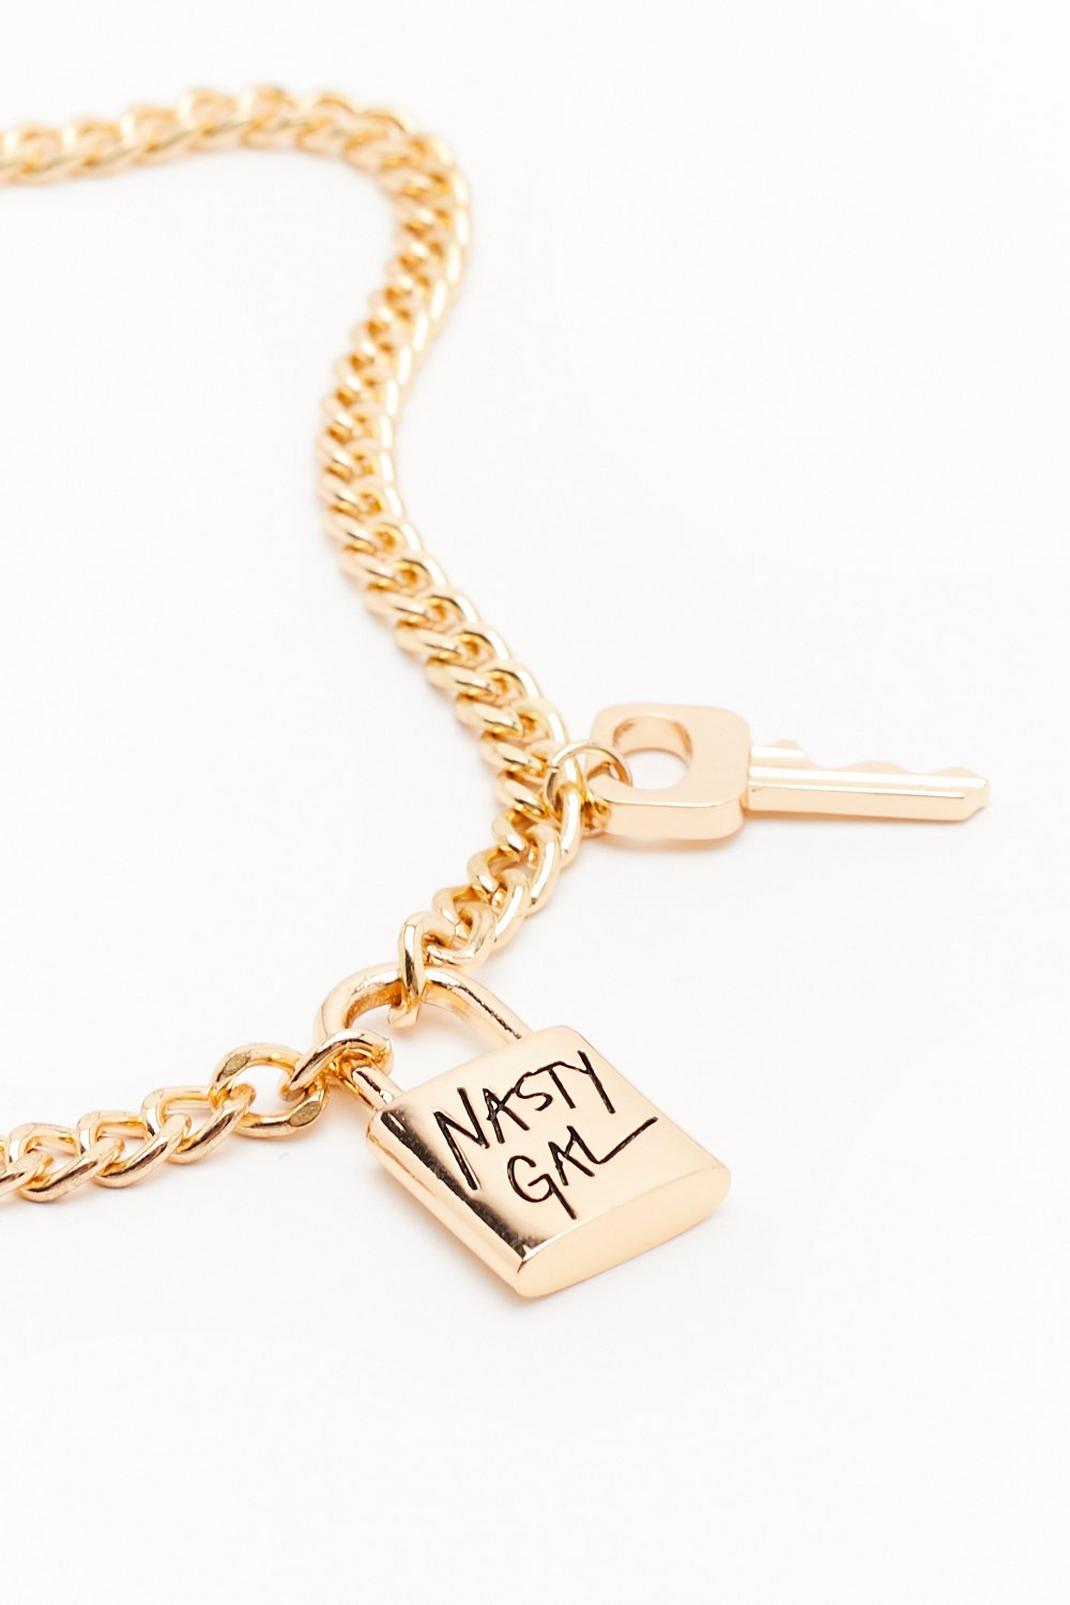 Club Nasty Gal Padlock Chain Necklace image number 1